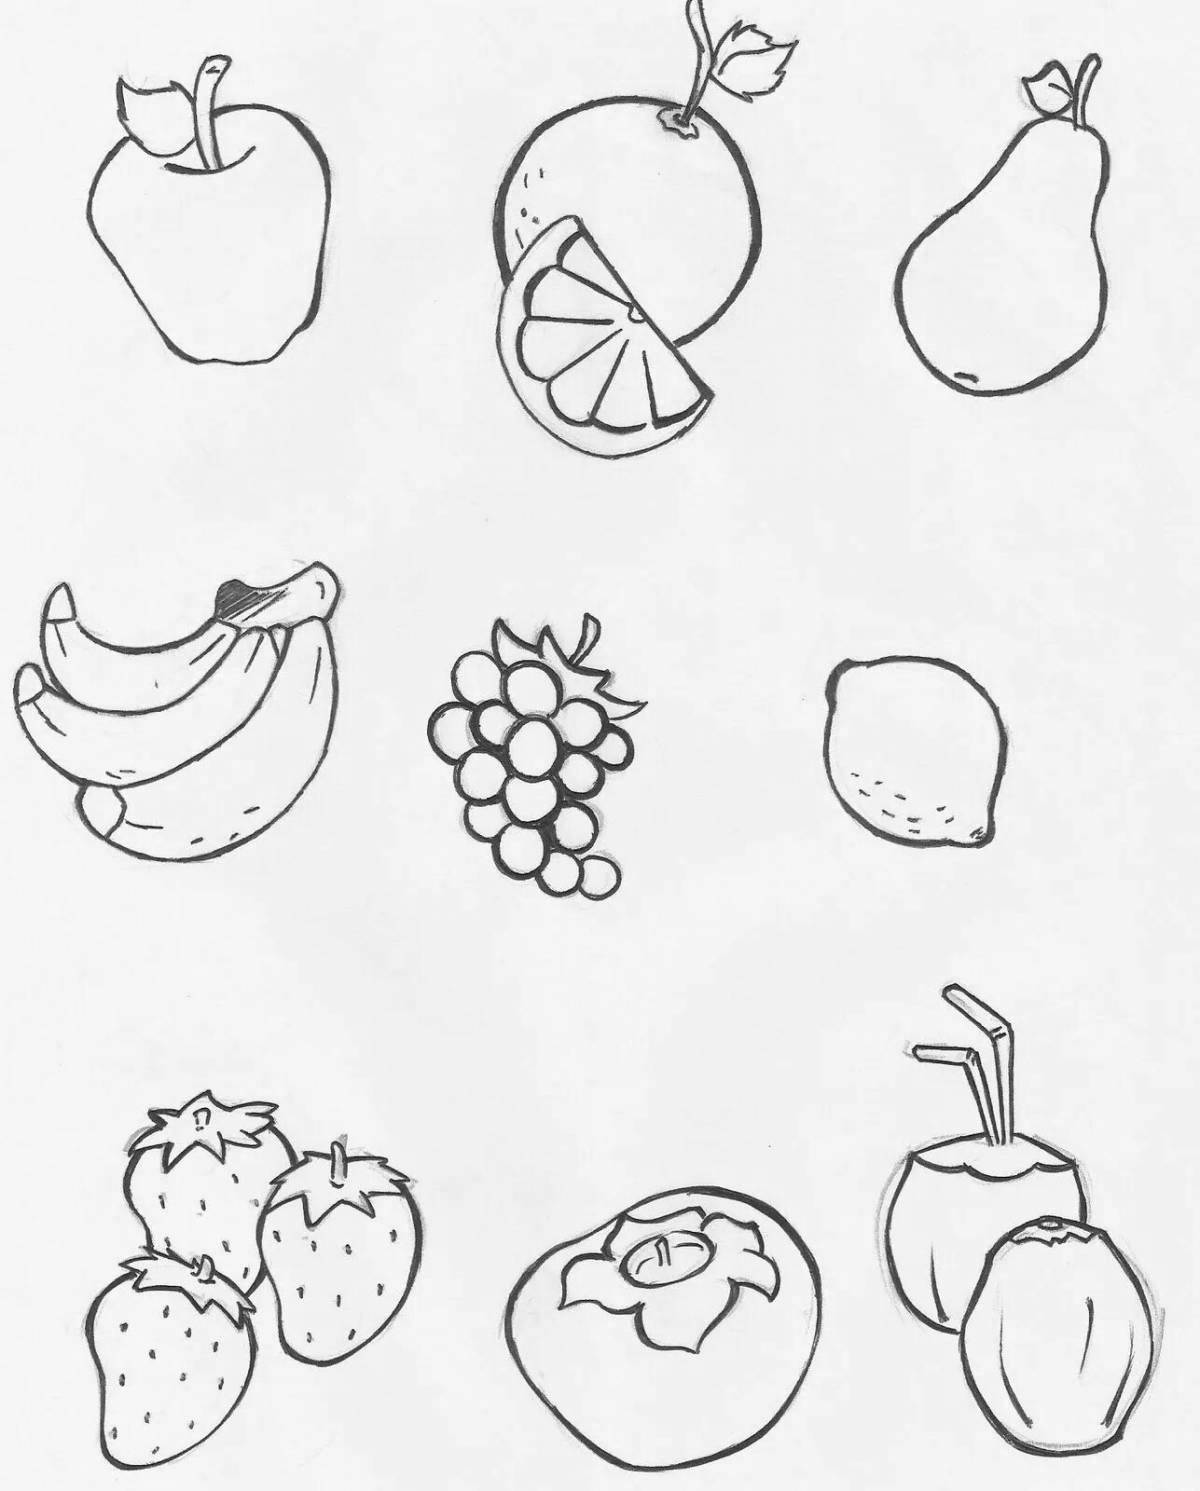 Colorful and bright coloring pages with fruits for children 5-6 years old